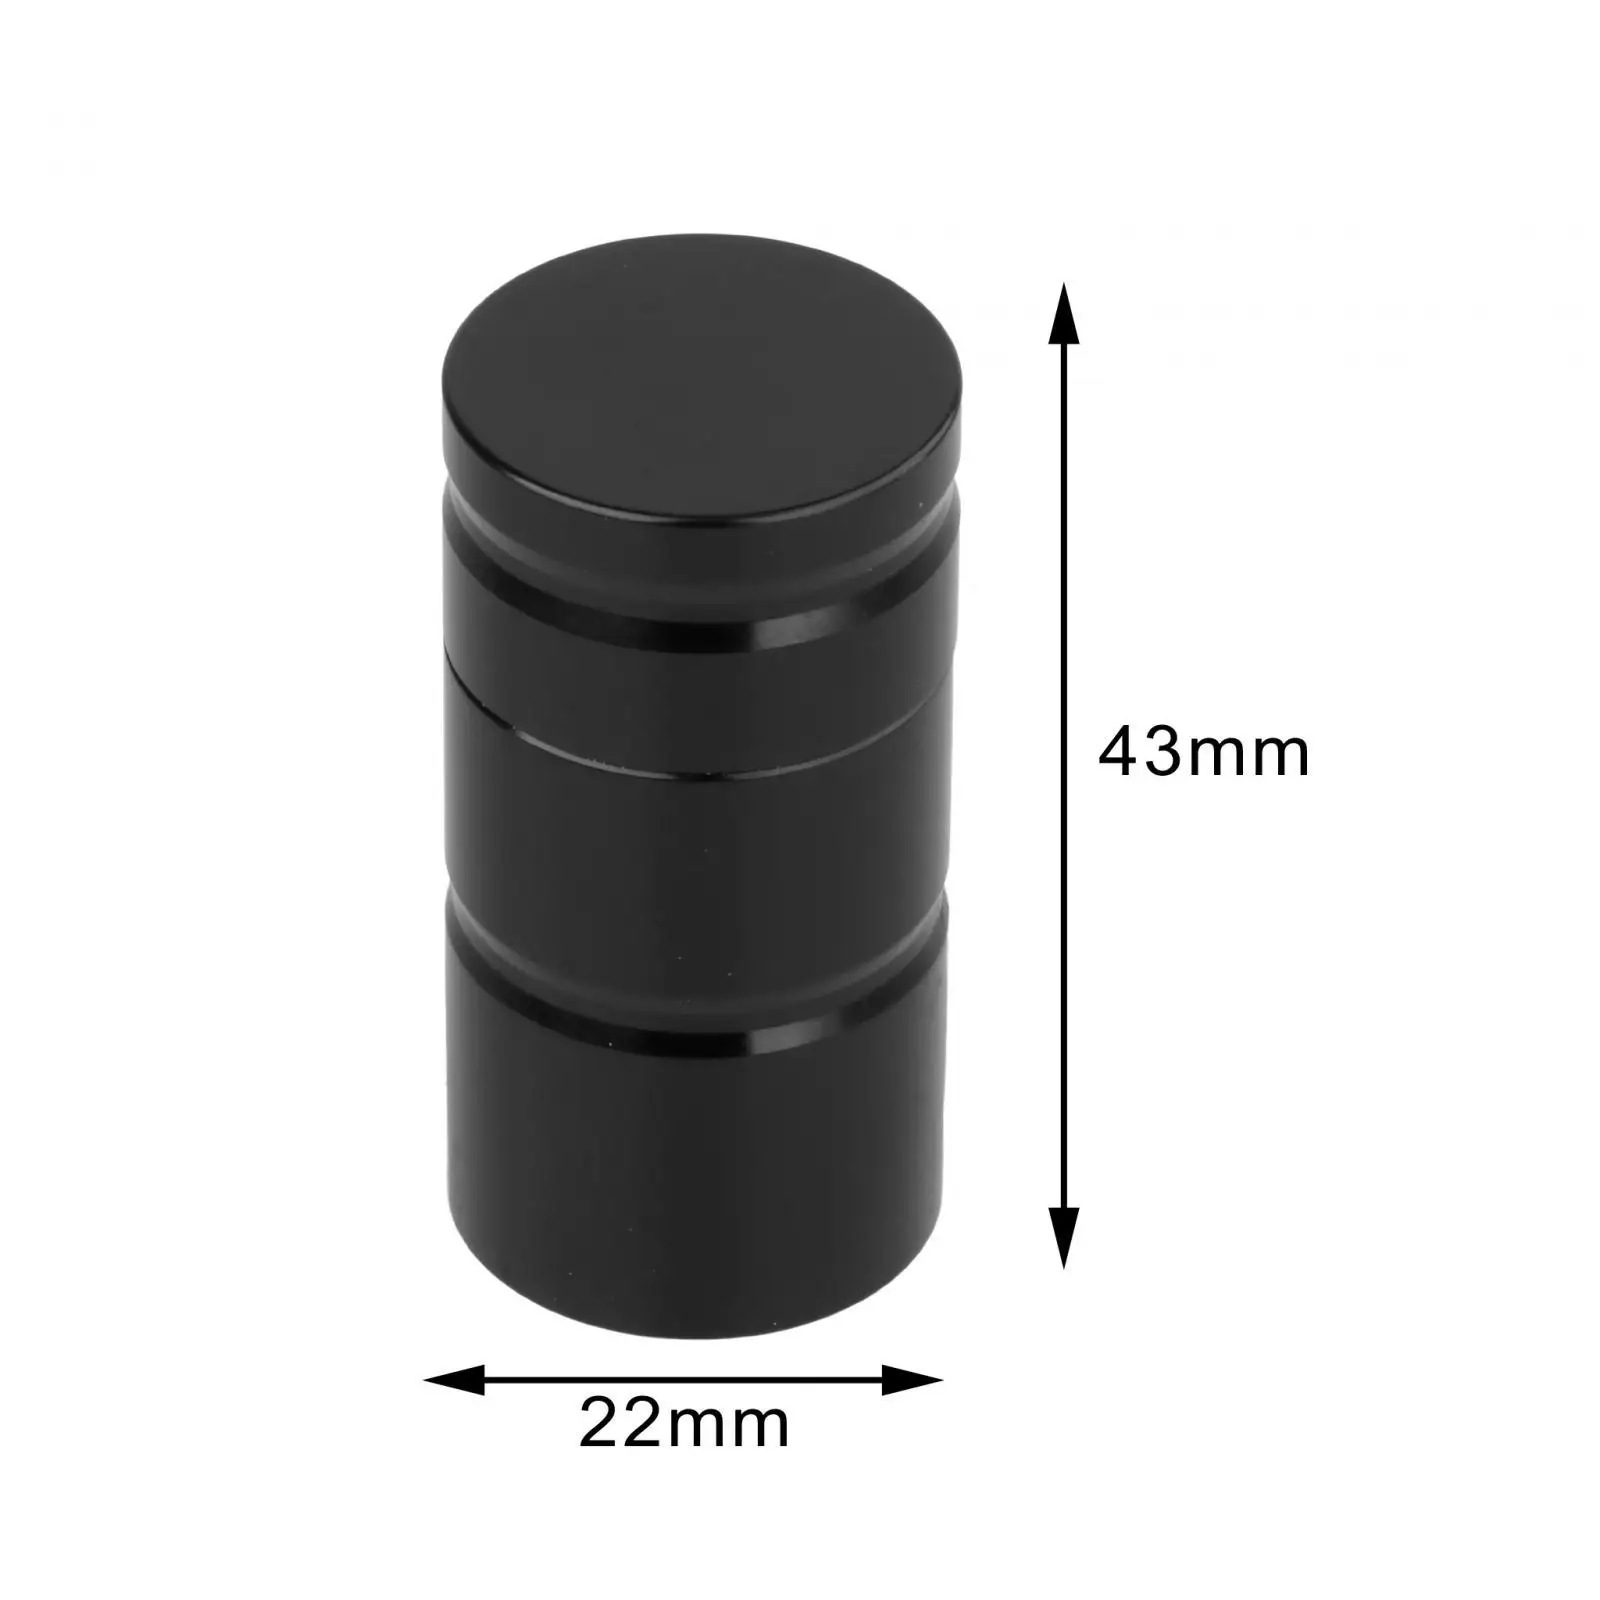 Joint Thread Protectors for Billiard Pool Cue Stick Billiards Stick Joint Caps Tool for Protect Your Cue Stick Snooker Equipment